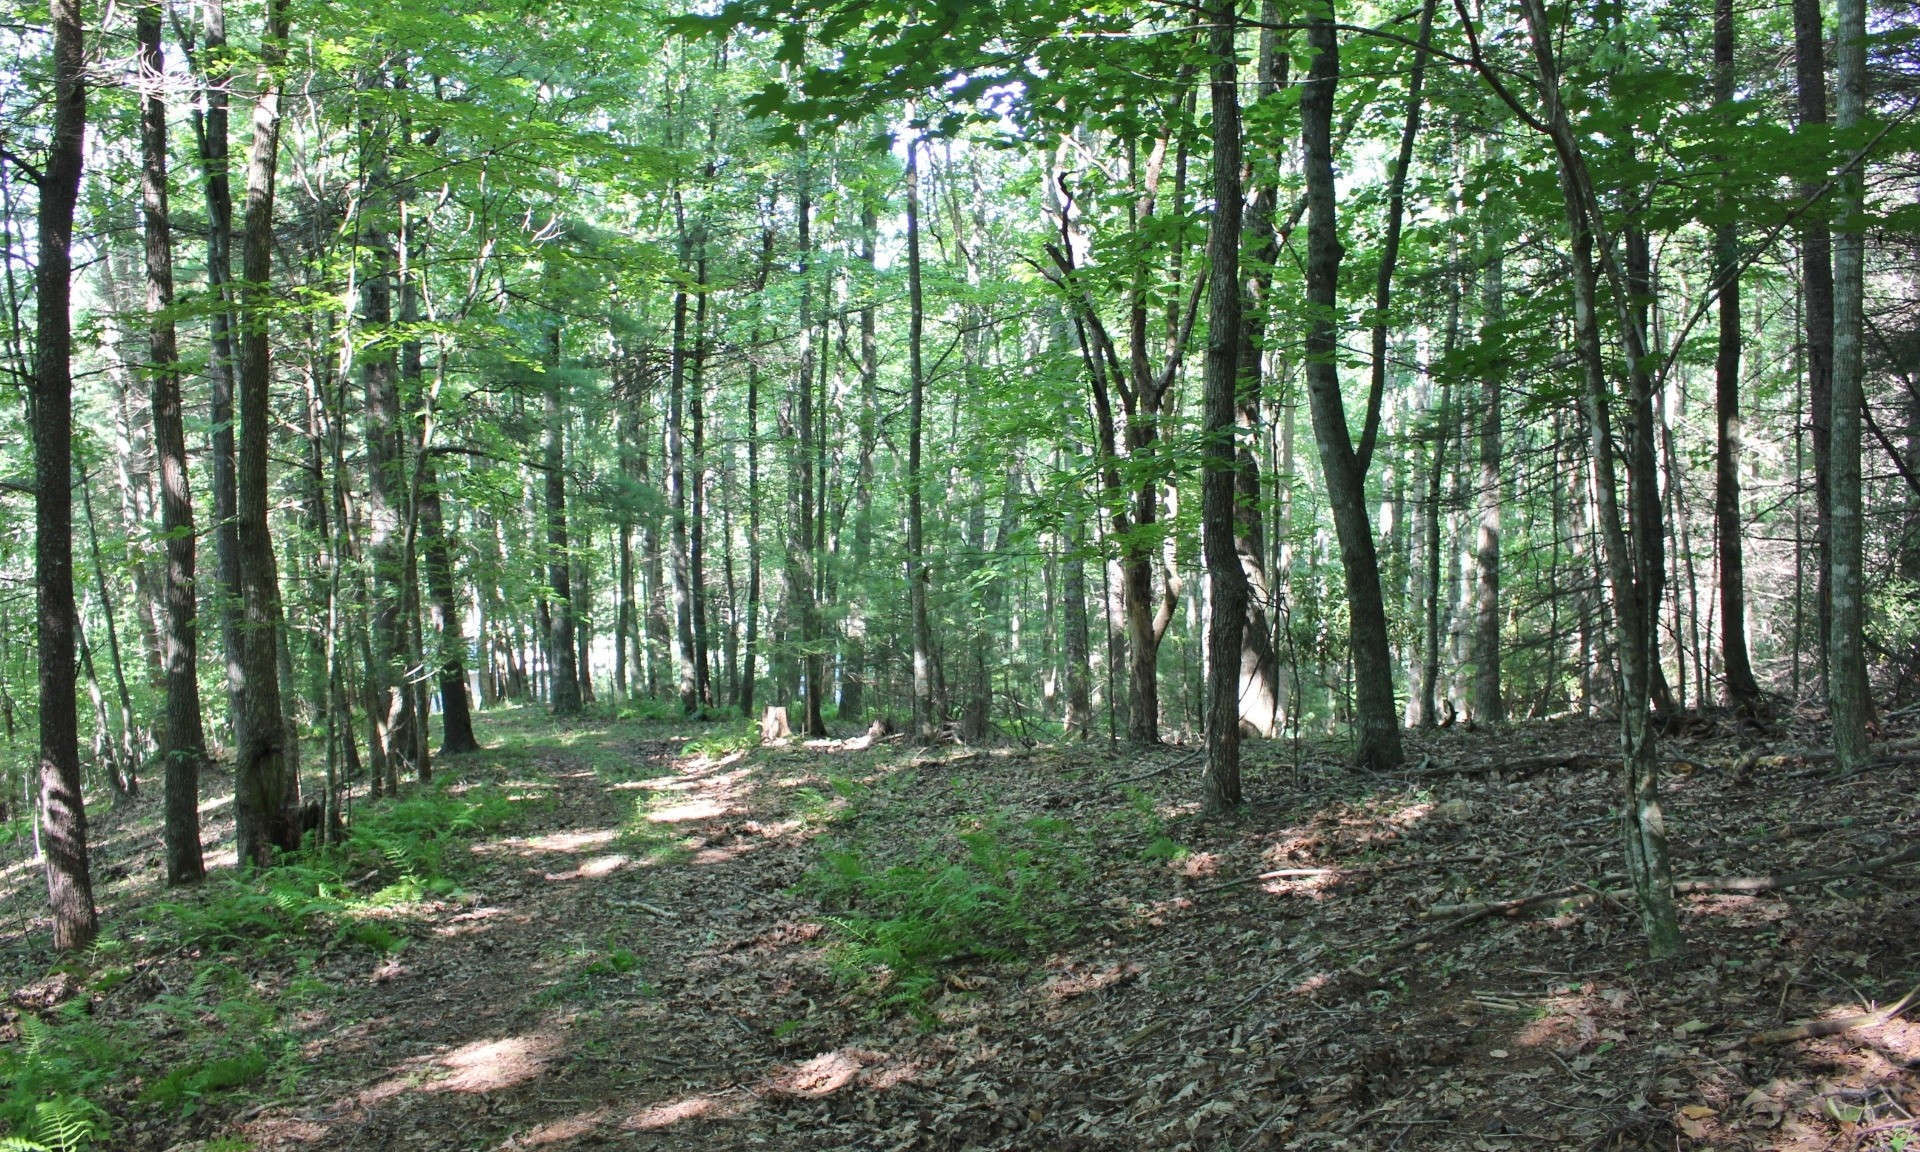 Lot 5 is a gently sloping 4.648 wooded tract filled with large white pine, hardwoods and rhododendron, the perfect environment for abundant wildlife.